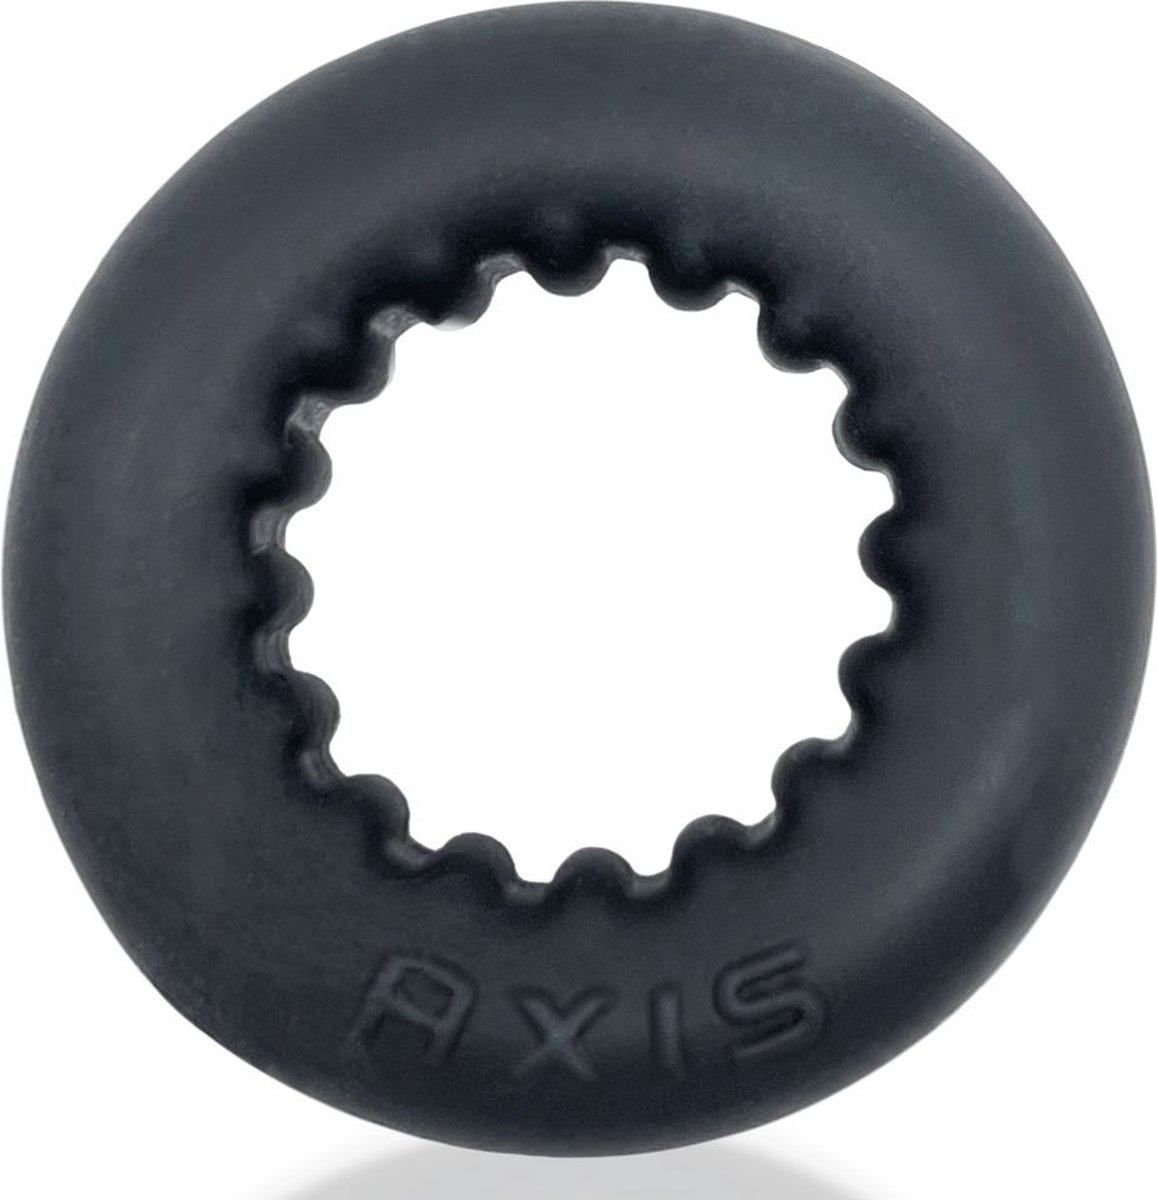 Oxballs - Ultracore Core Ballstretcher met Axis Ring - Rood